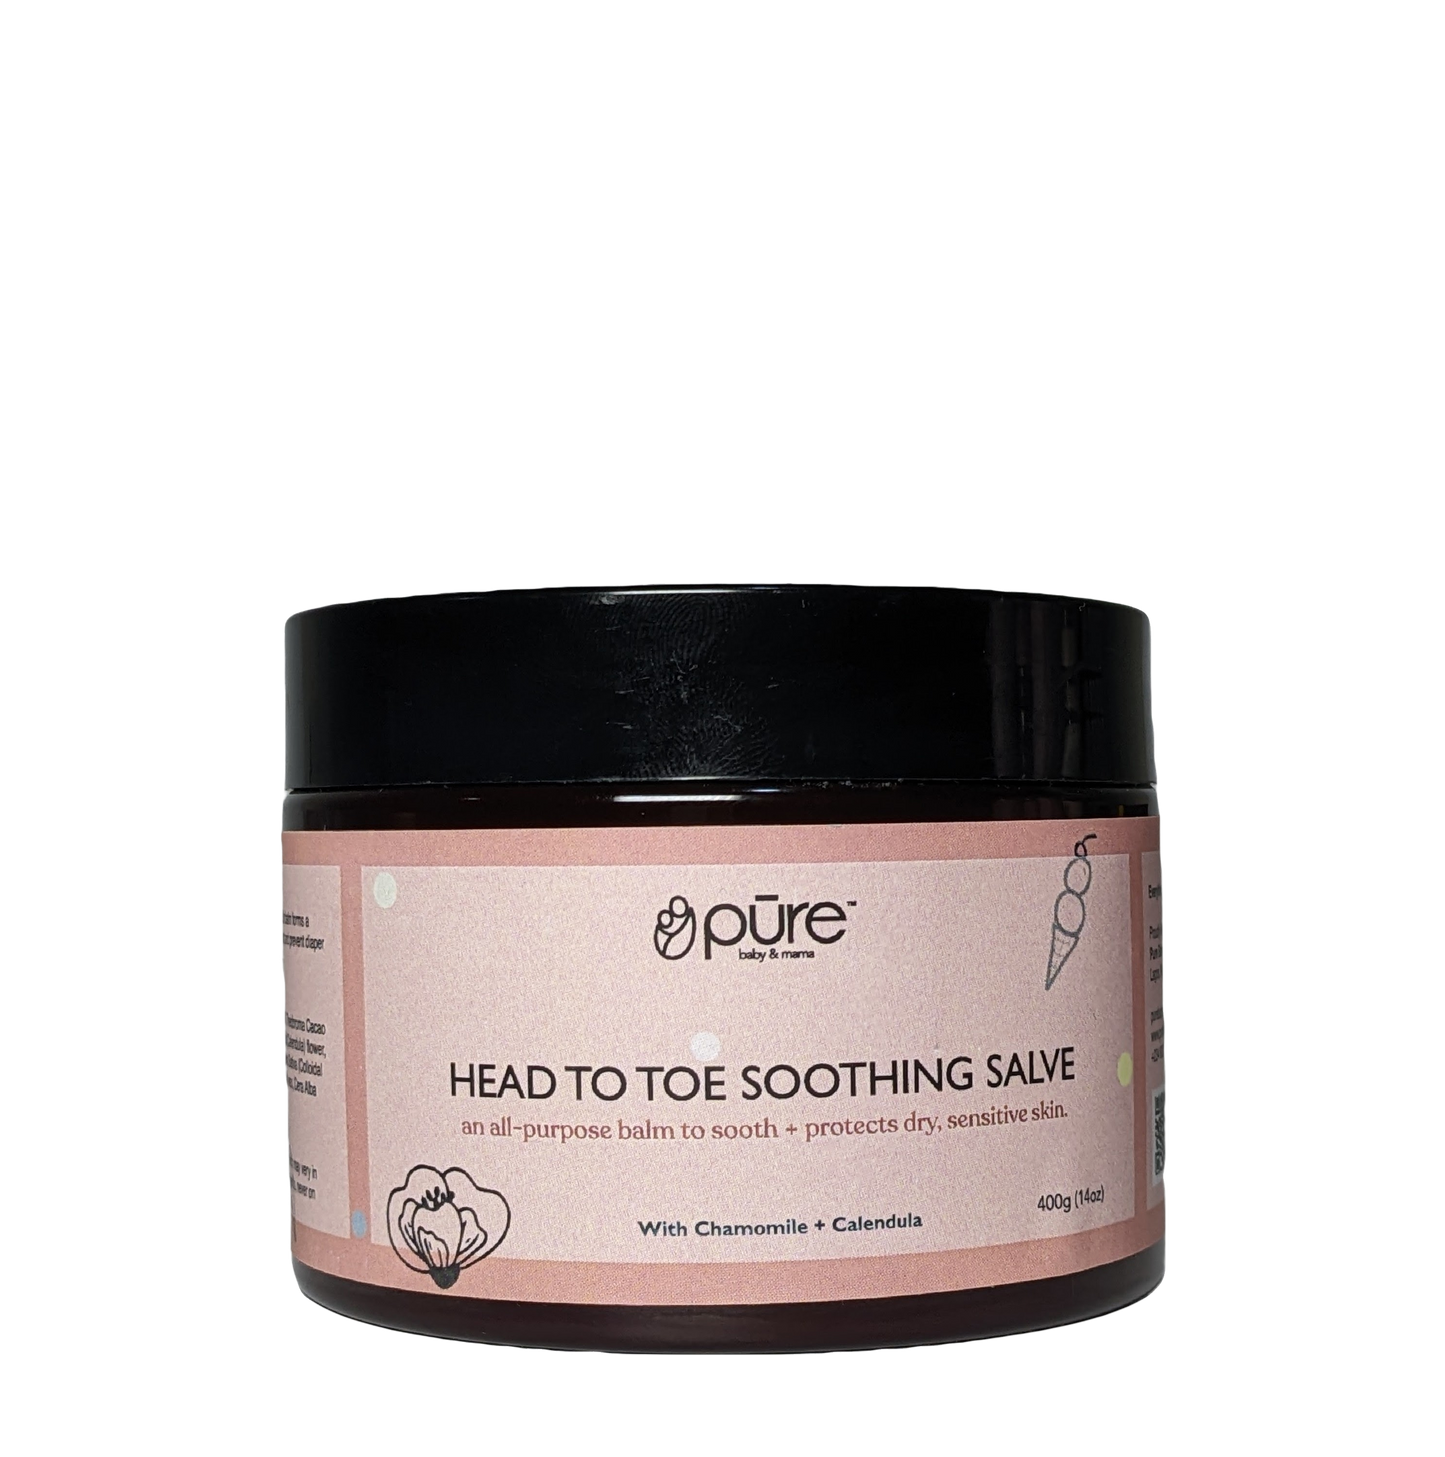 Head to Toe Soothing Salve